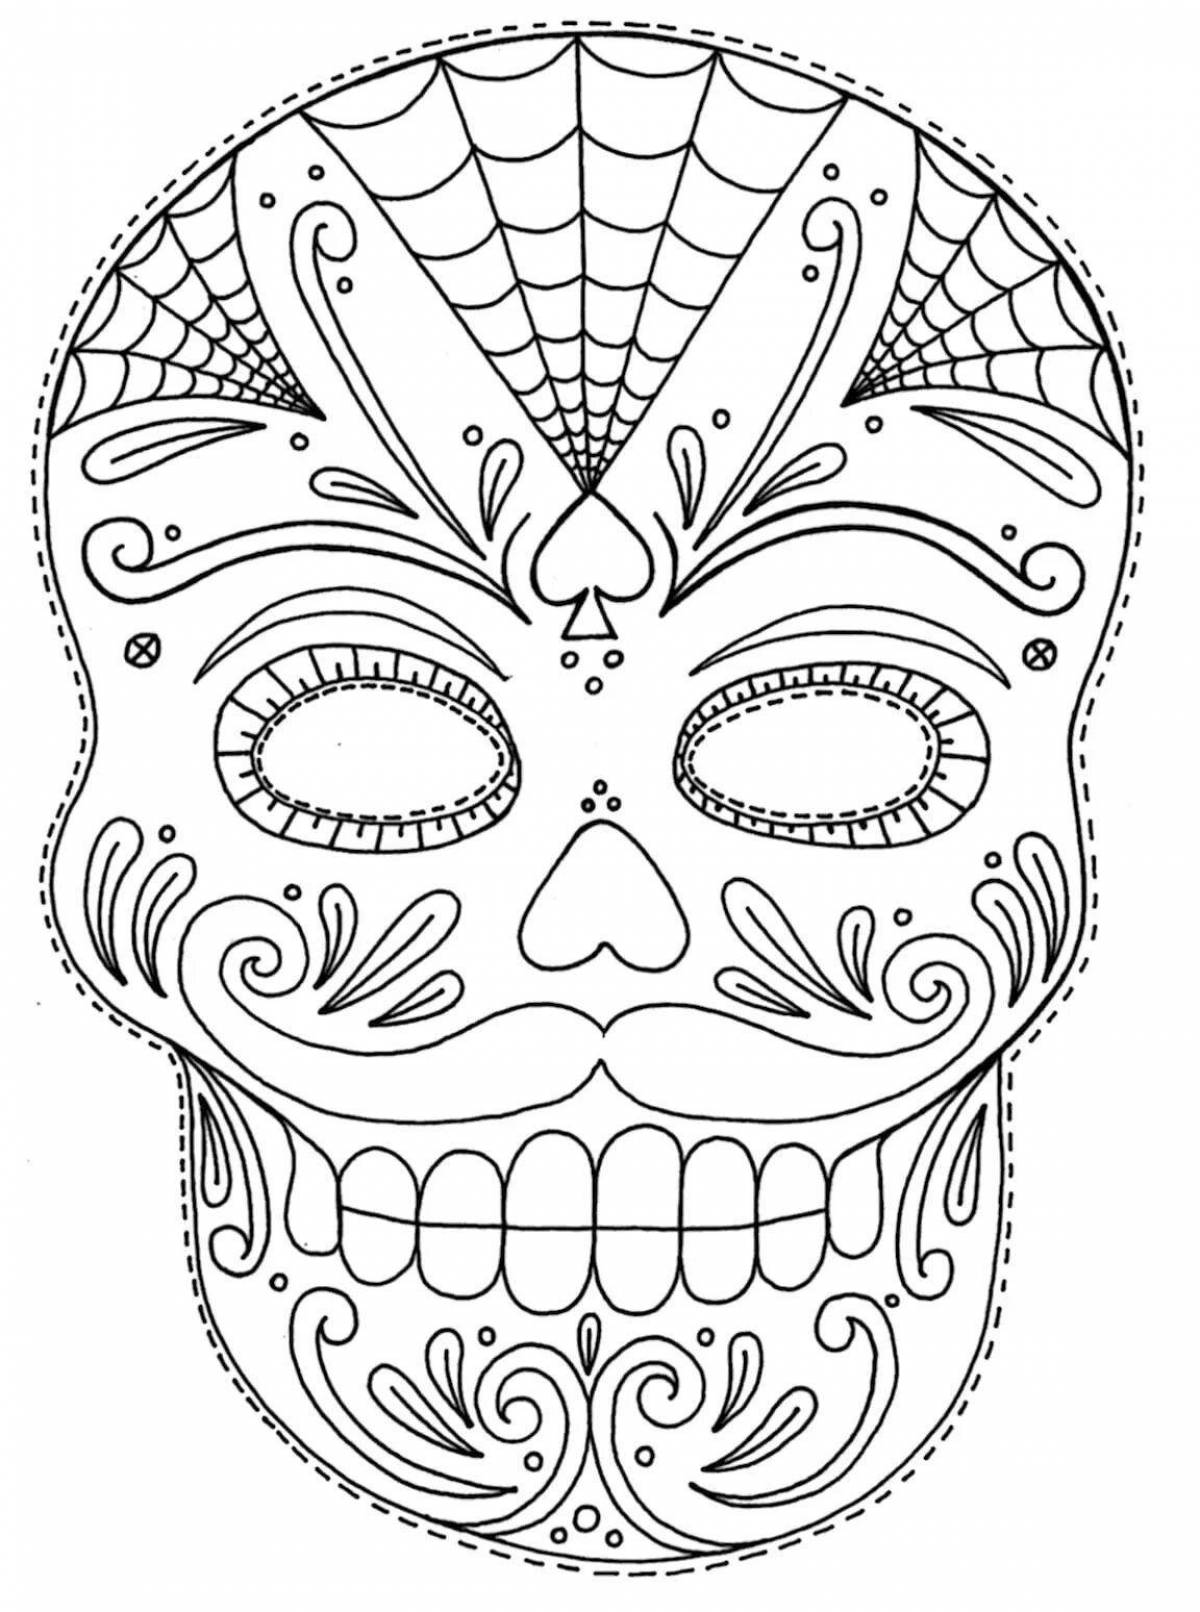 Coloring sheet funny fabric mask